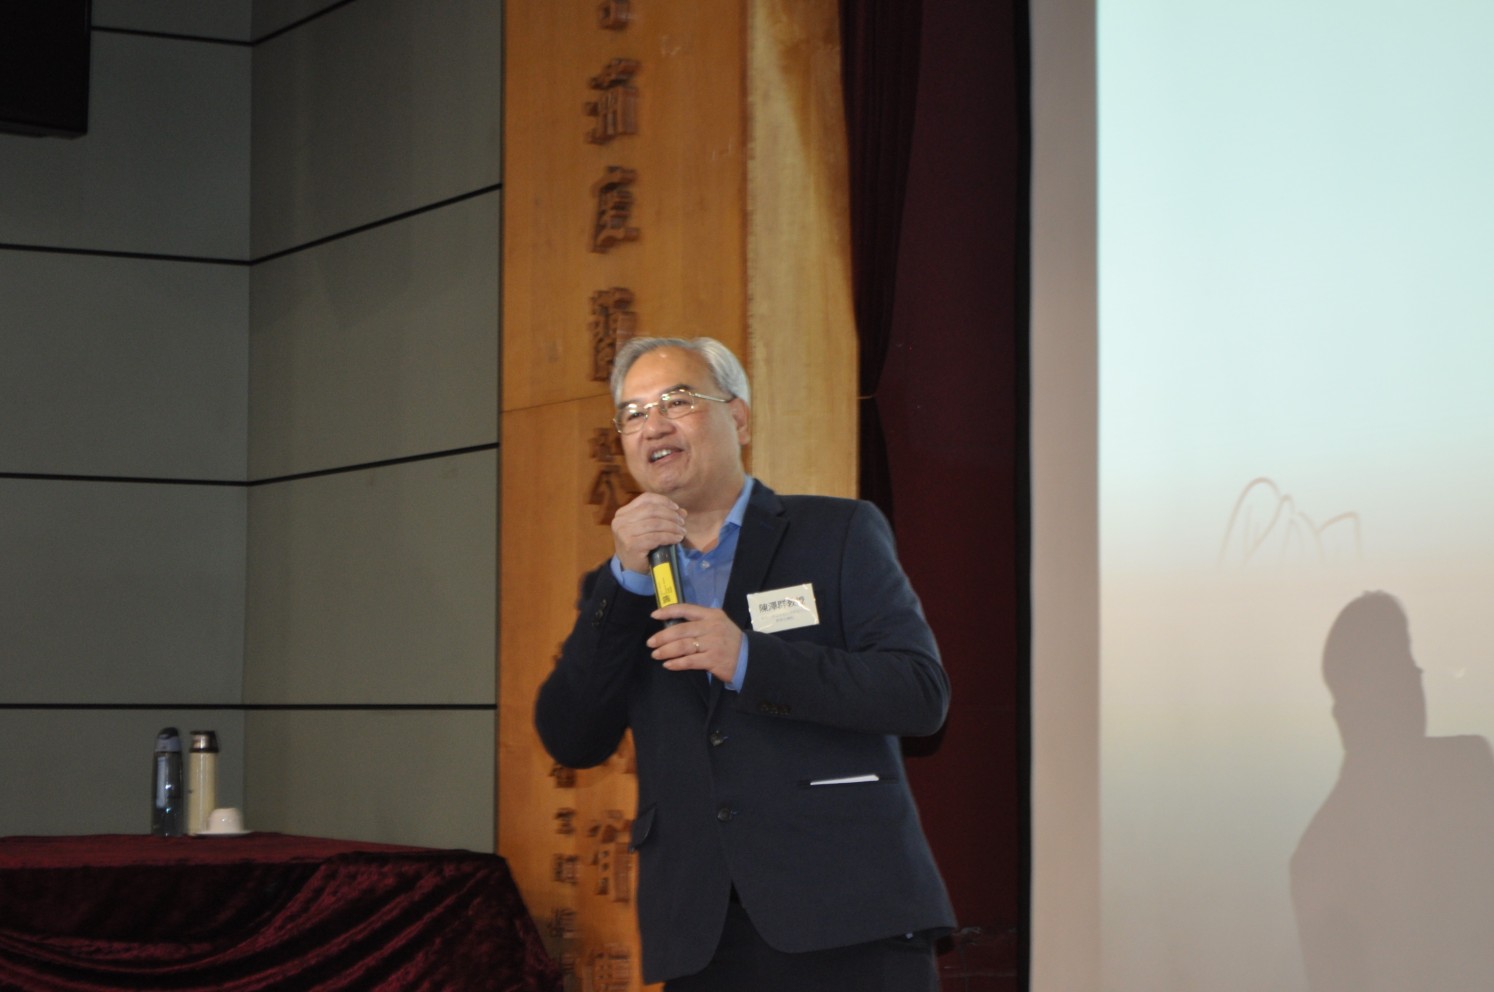 Prof Dickson Chan Chak-kwan, Director of the Asia-Pacific Institute of Ageing Studies at Lingnan University